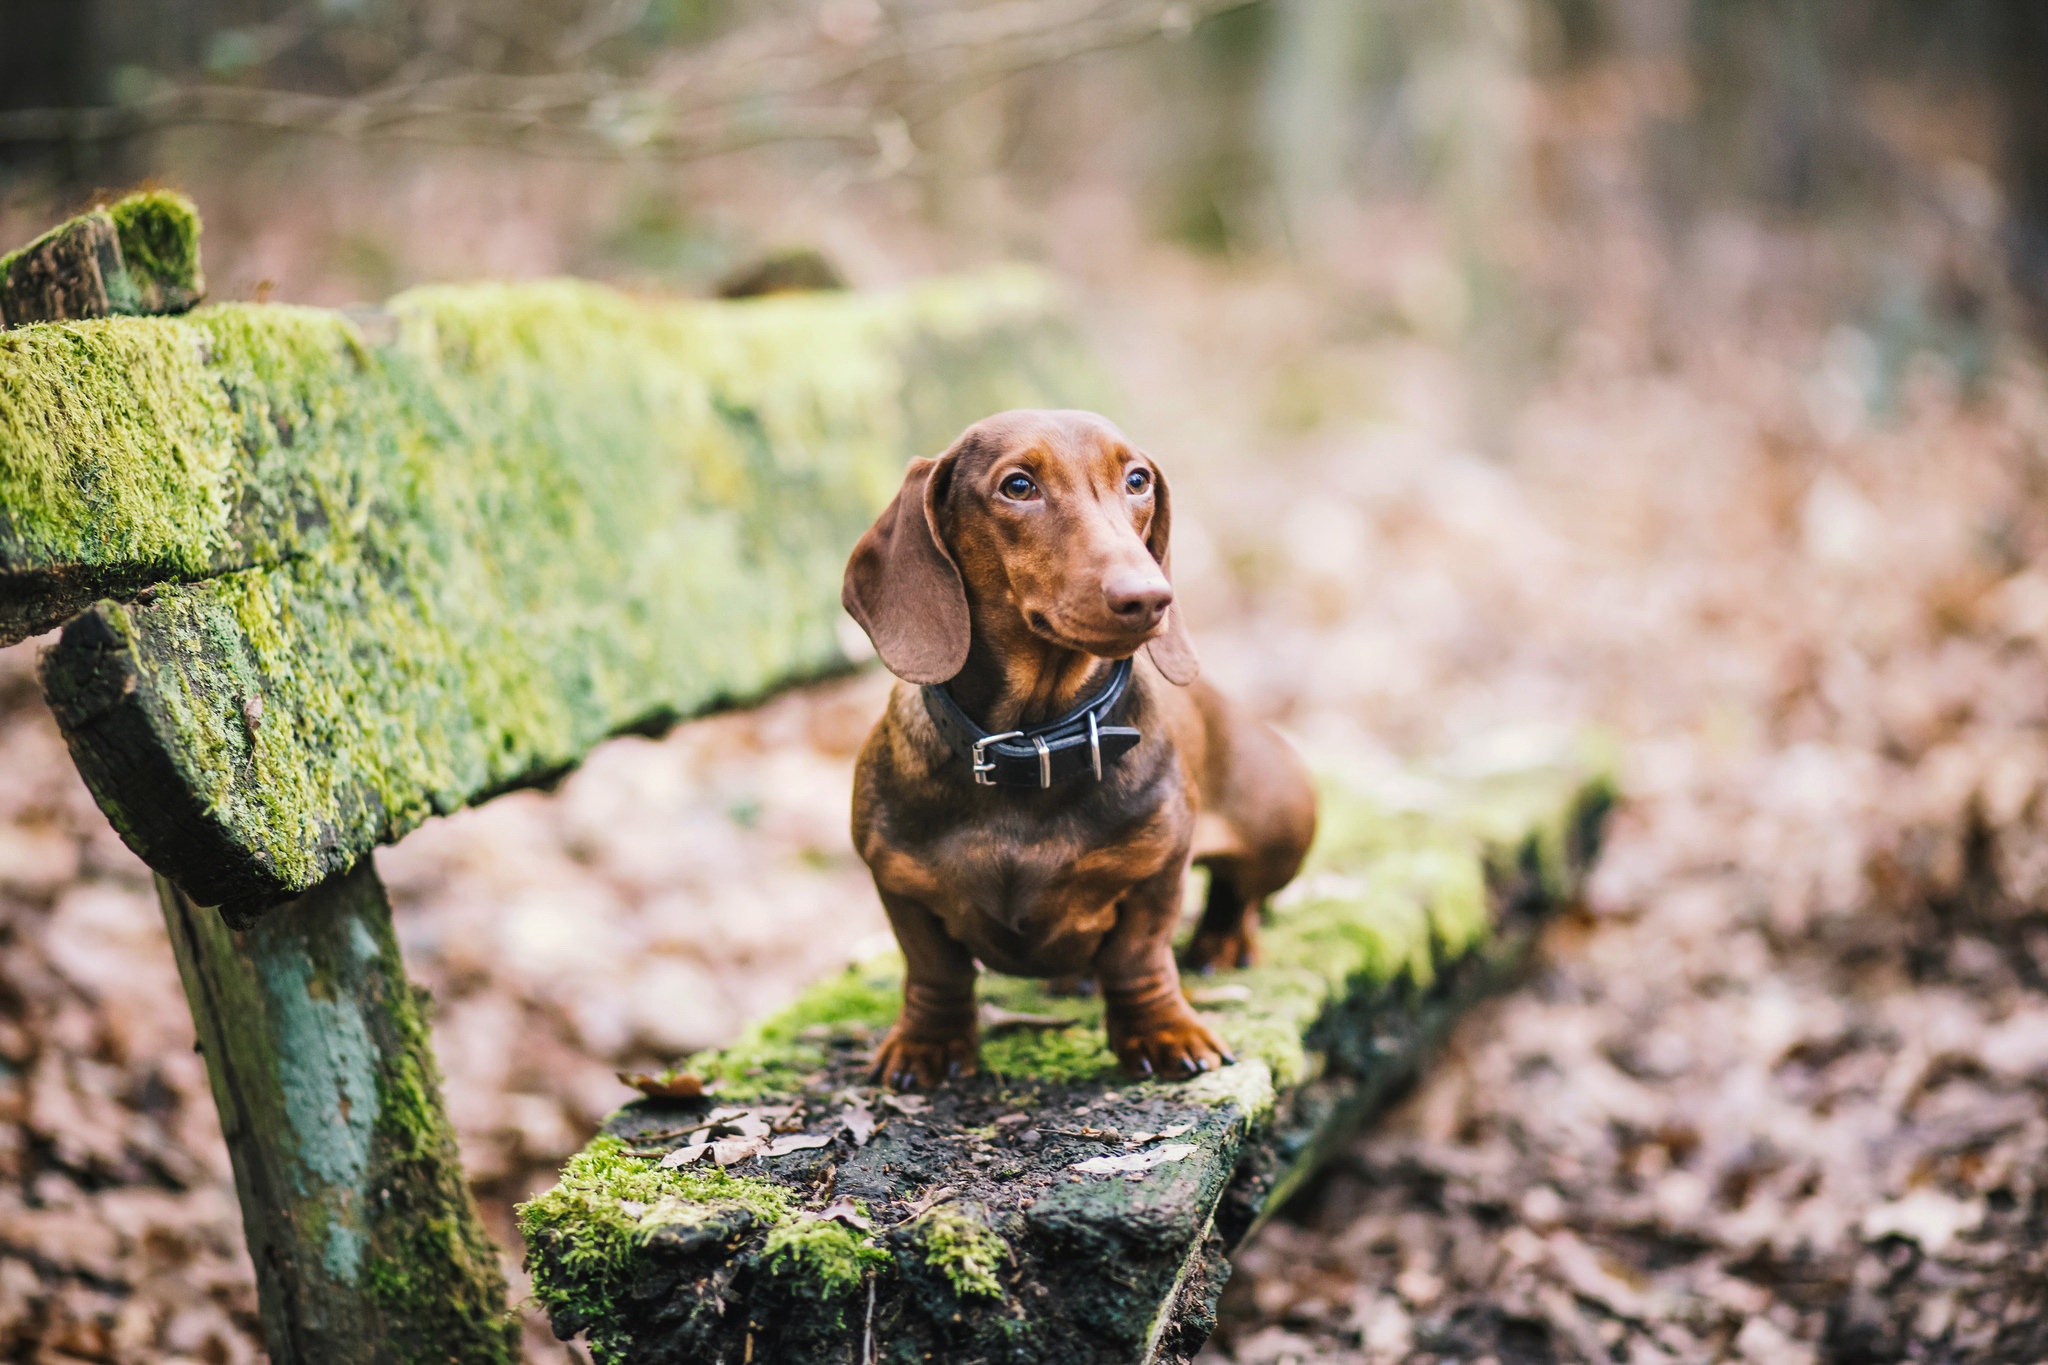 General 2048x1365 dog old animals moss leaves bench dachshund